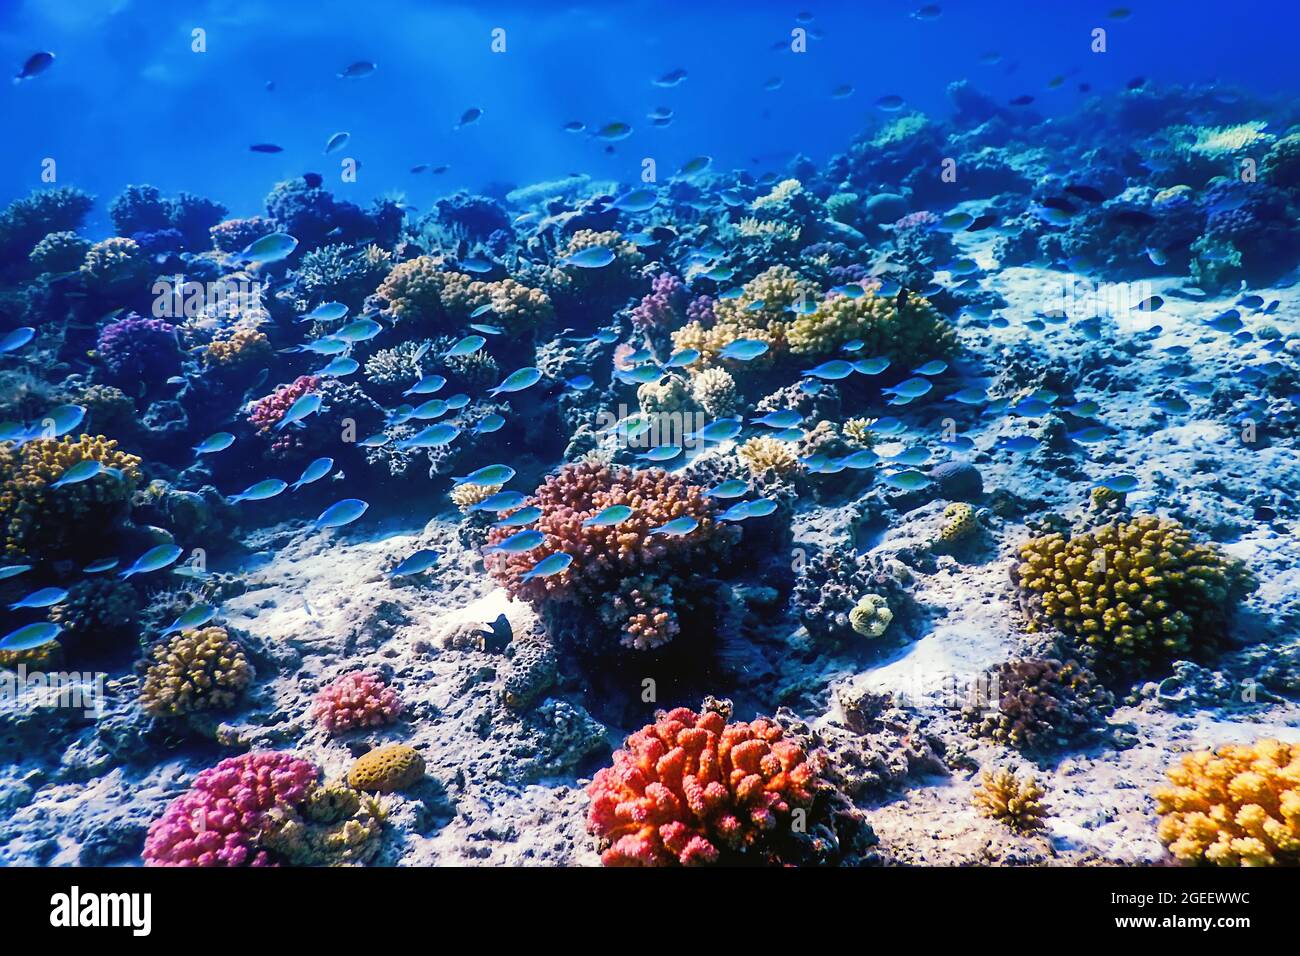 Underwater view of the coral reef, Tropical waters, Marine life Stock ...